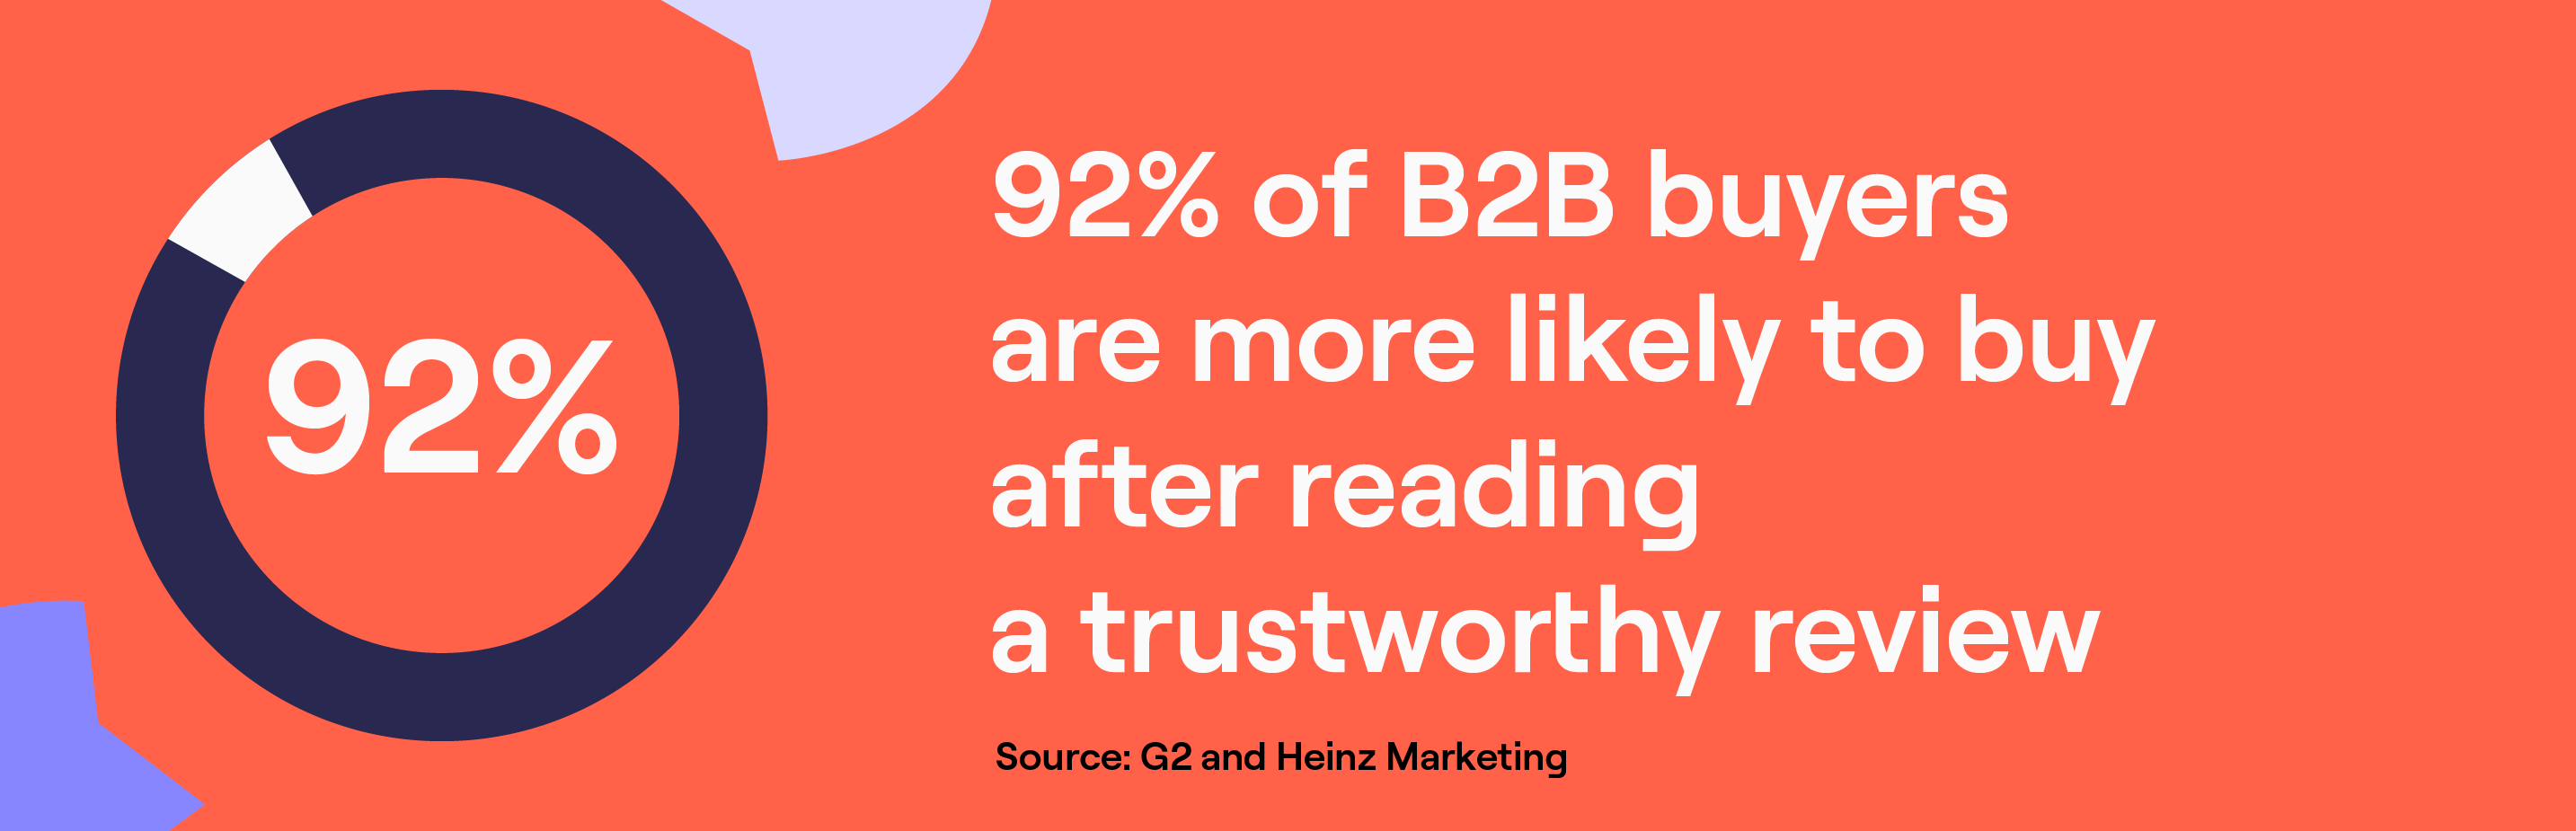 Studies show that the purchase decision of B2B customers is strongly influenced by reviews.